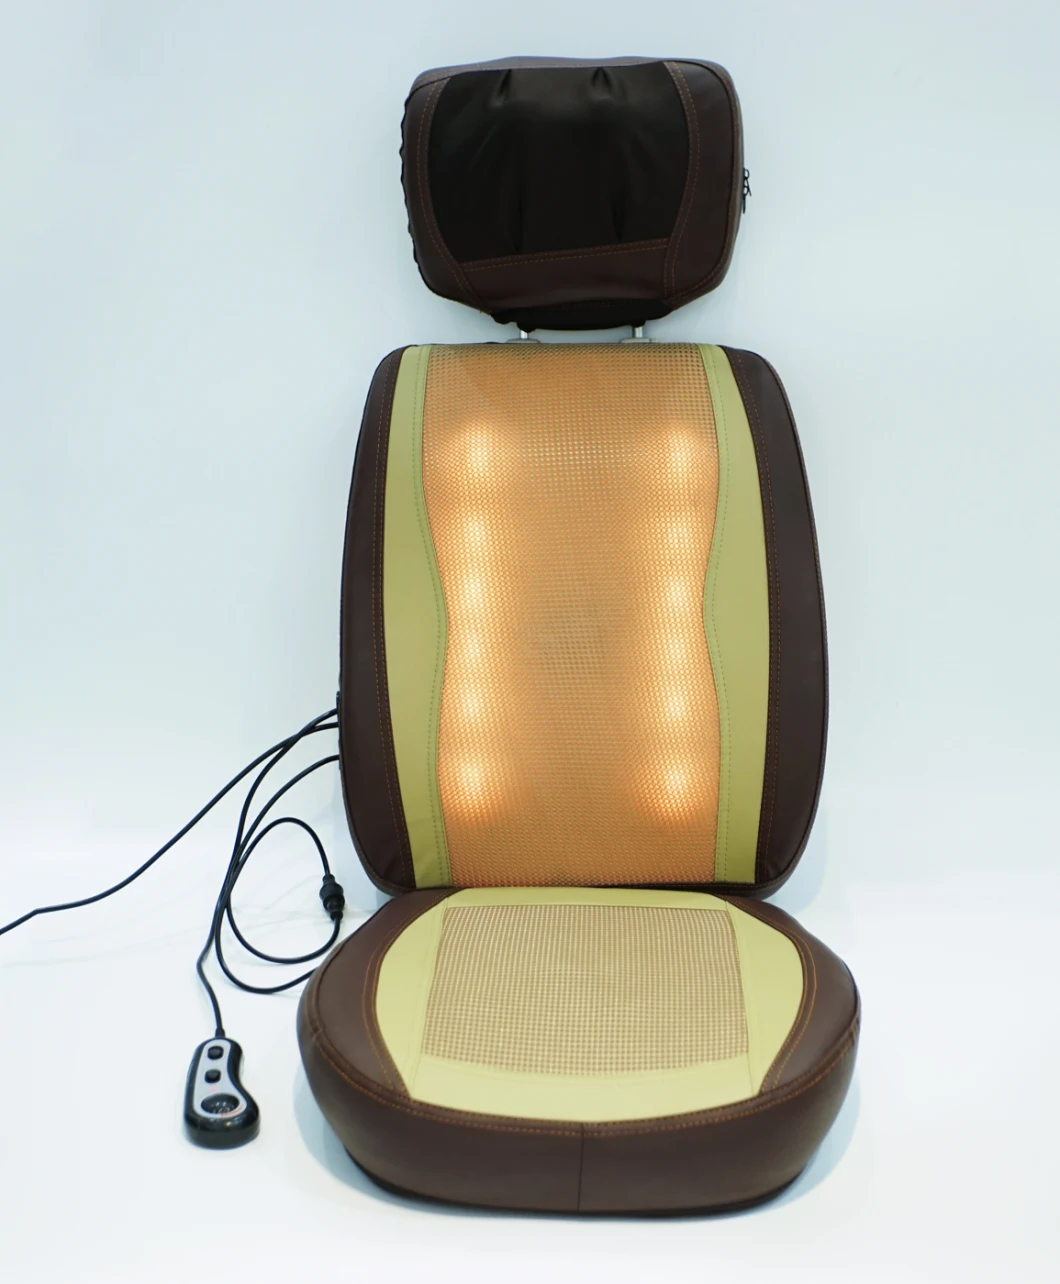 New Design Multifunction Massage Chair Relieve Body Ache Promote Blood Circulation Body Relax